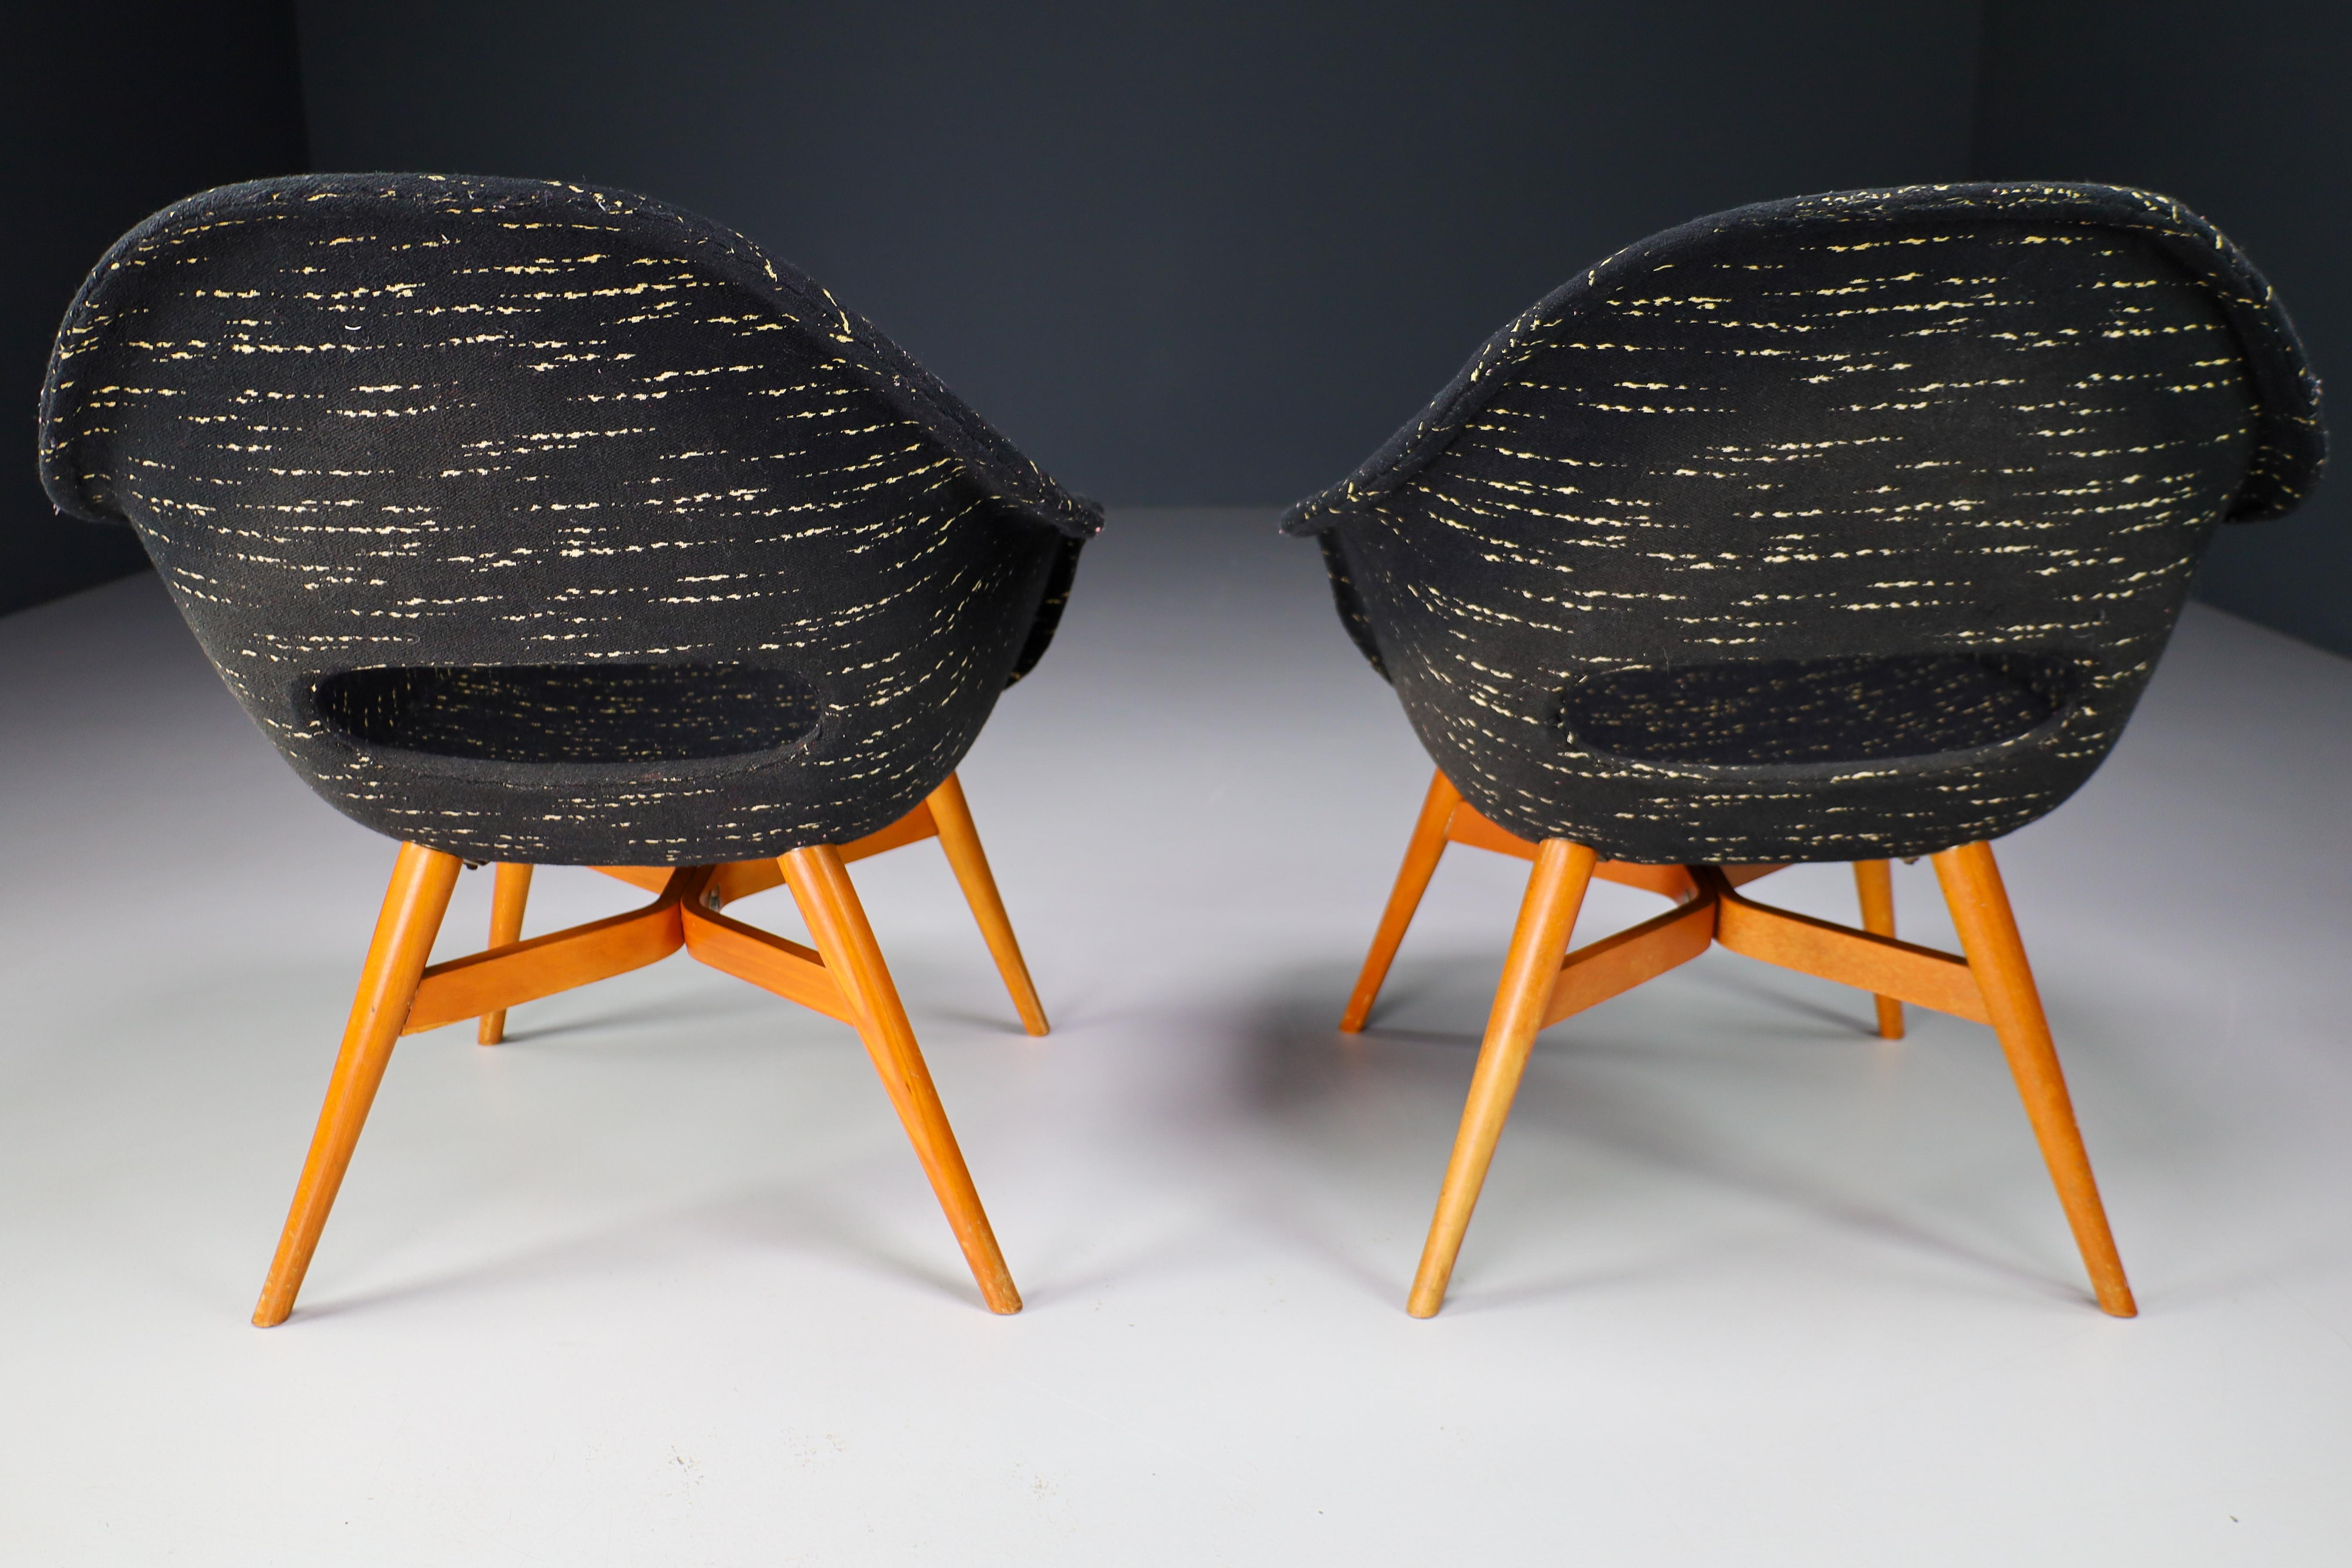 Two Original Easy Chairs by Miroslav Navratil in Original Fabric, circa 1960 In Good Condition For Sale In Almelo, NL